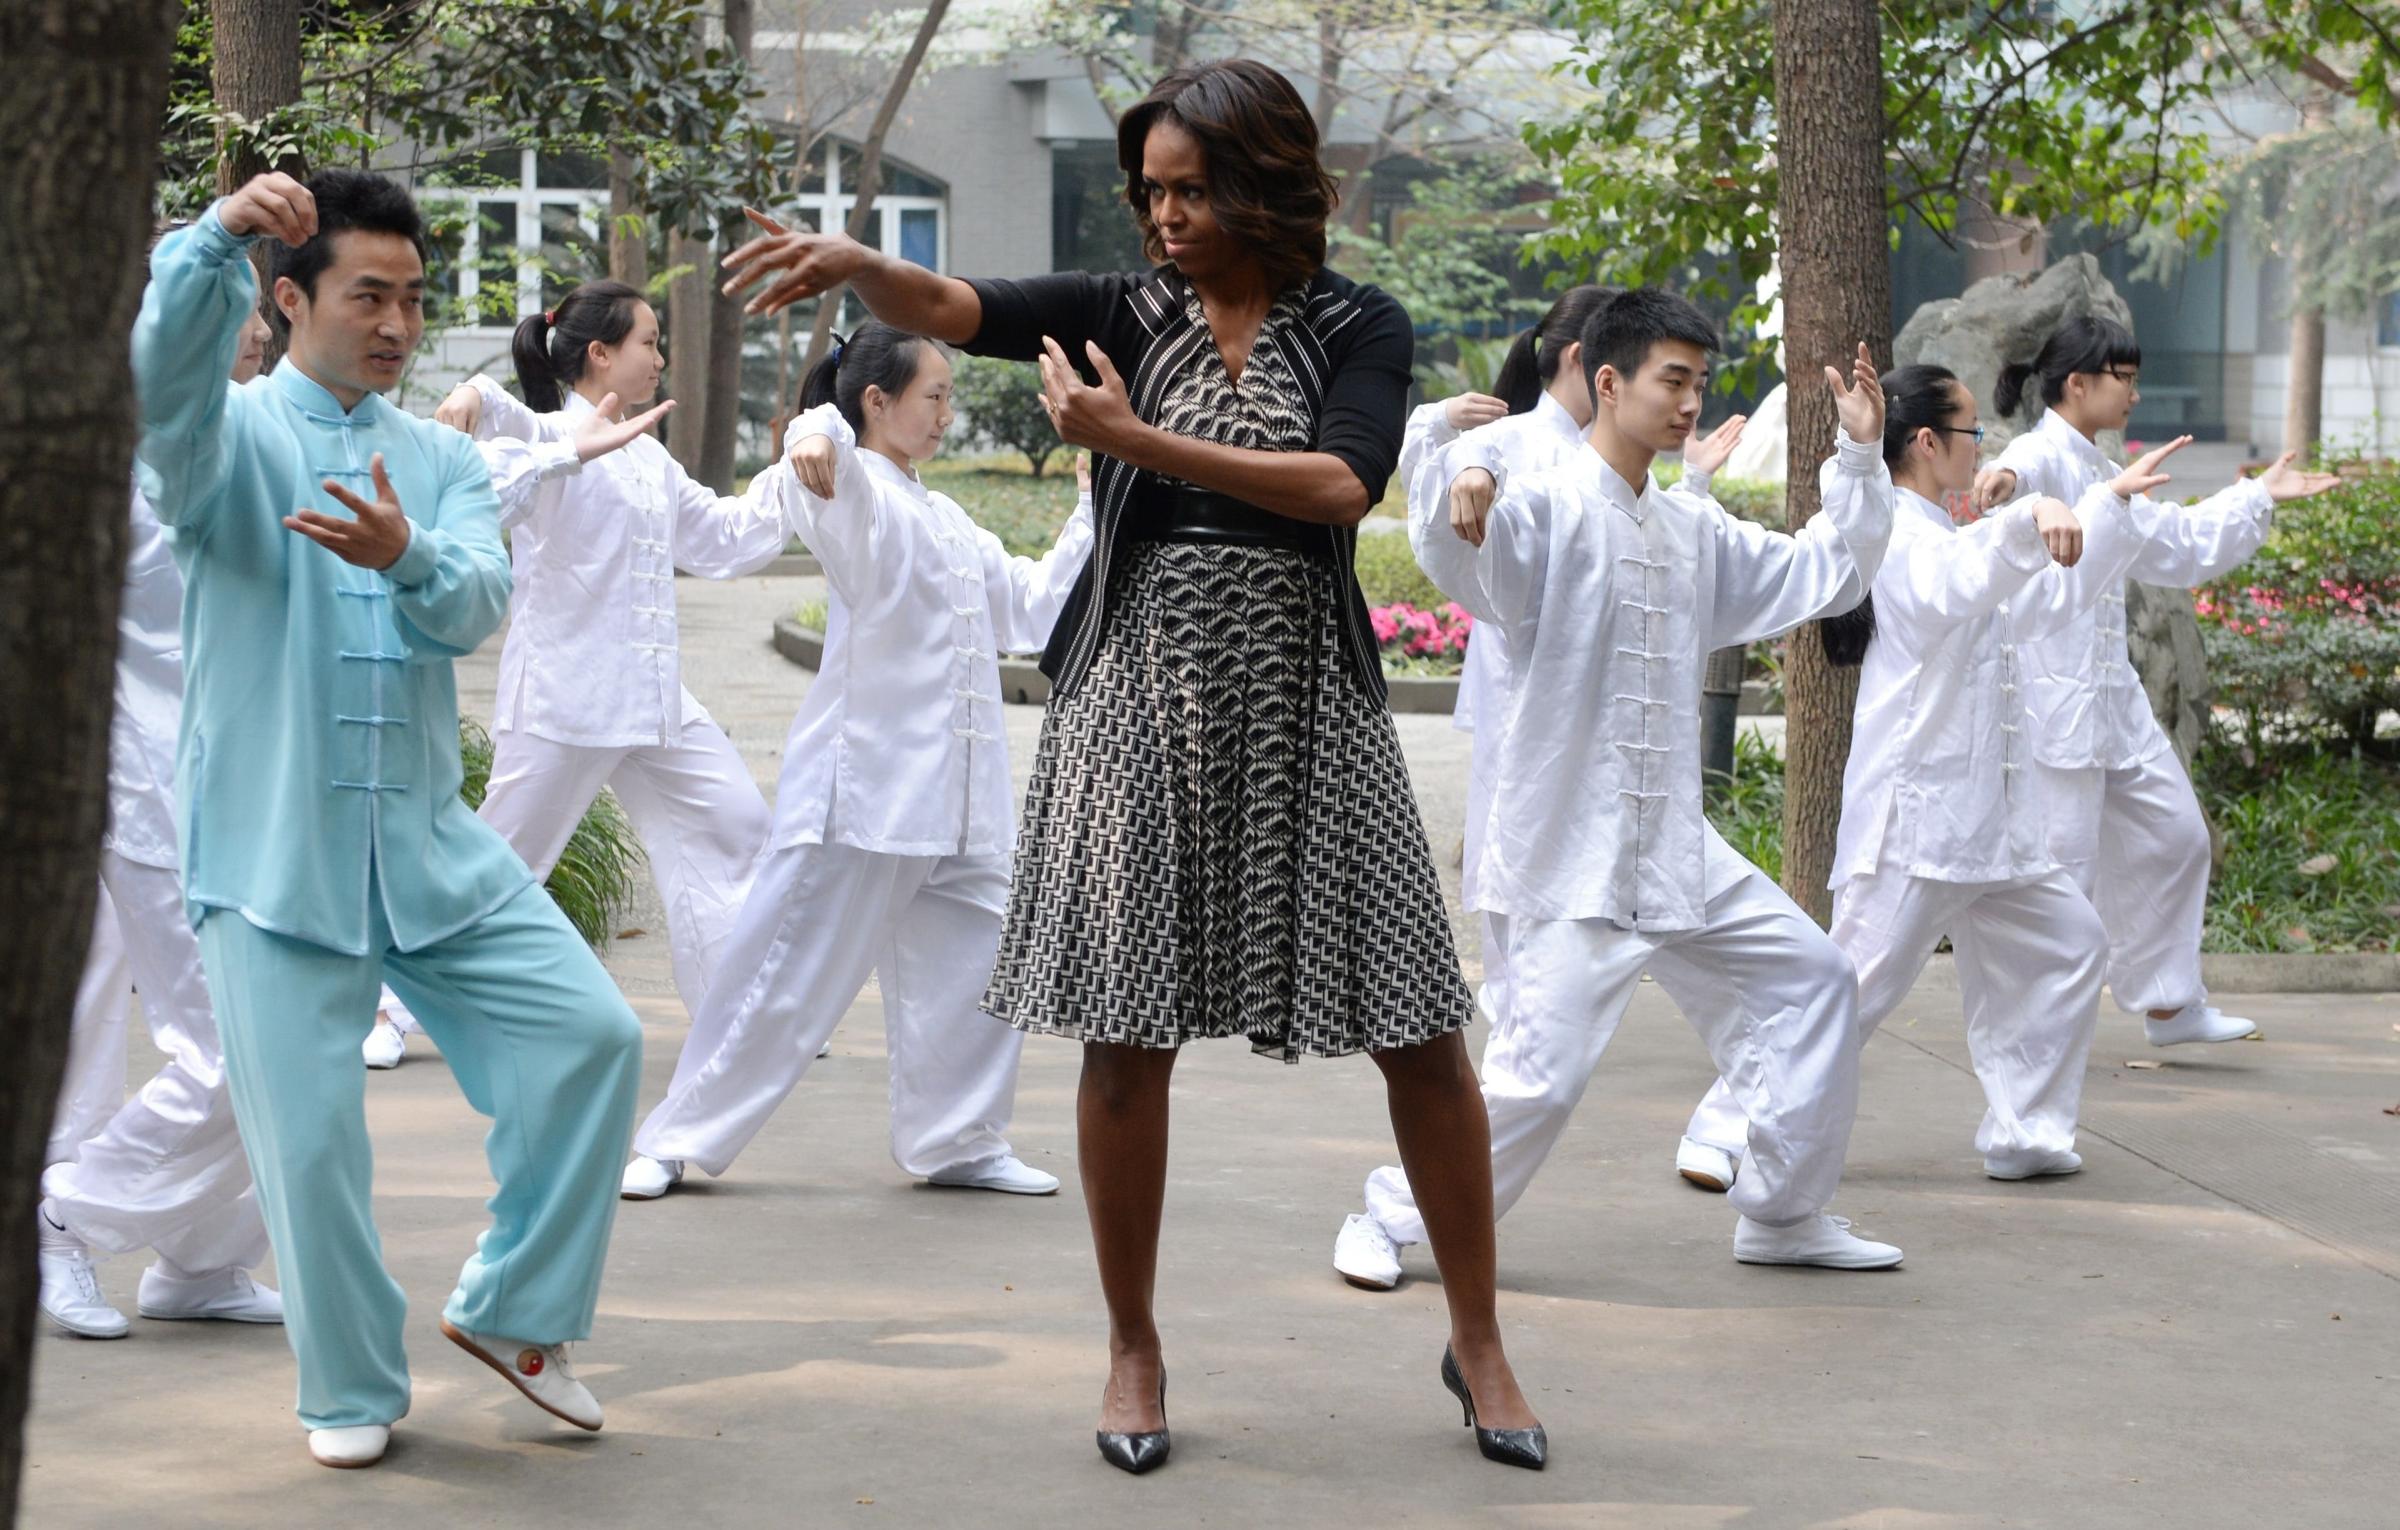 US First Lady Michelle Obama performs "tai chi" with students from the Chengdu No7 High School in Chengdu in China's southwest Sichuan province on March 25, 2014.